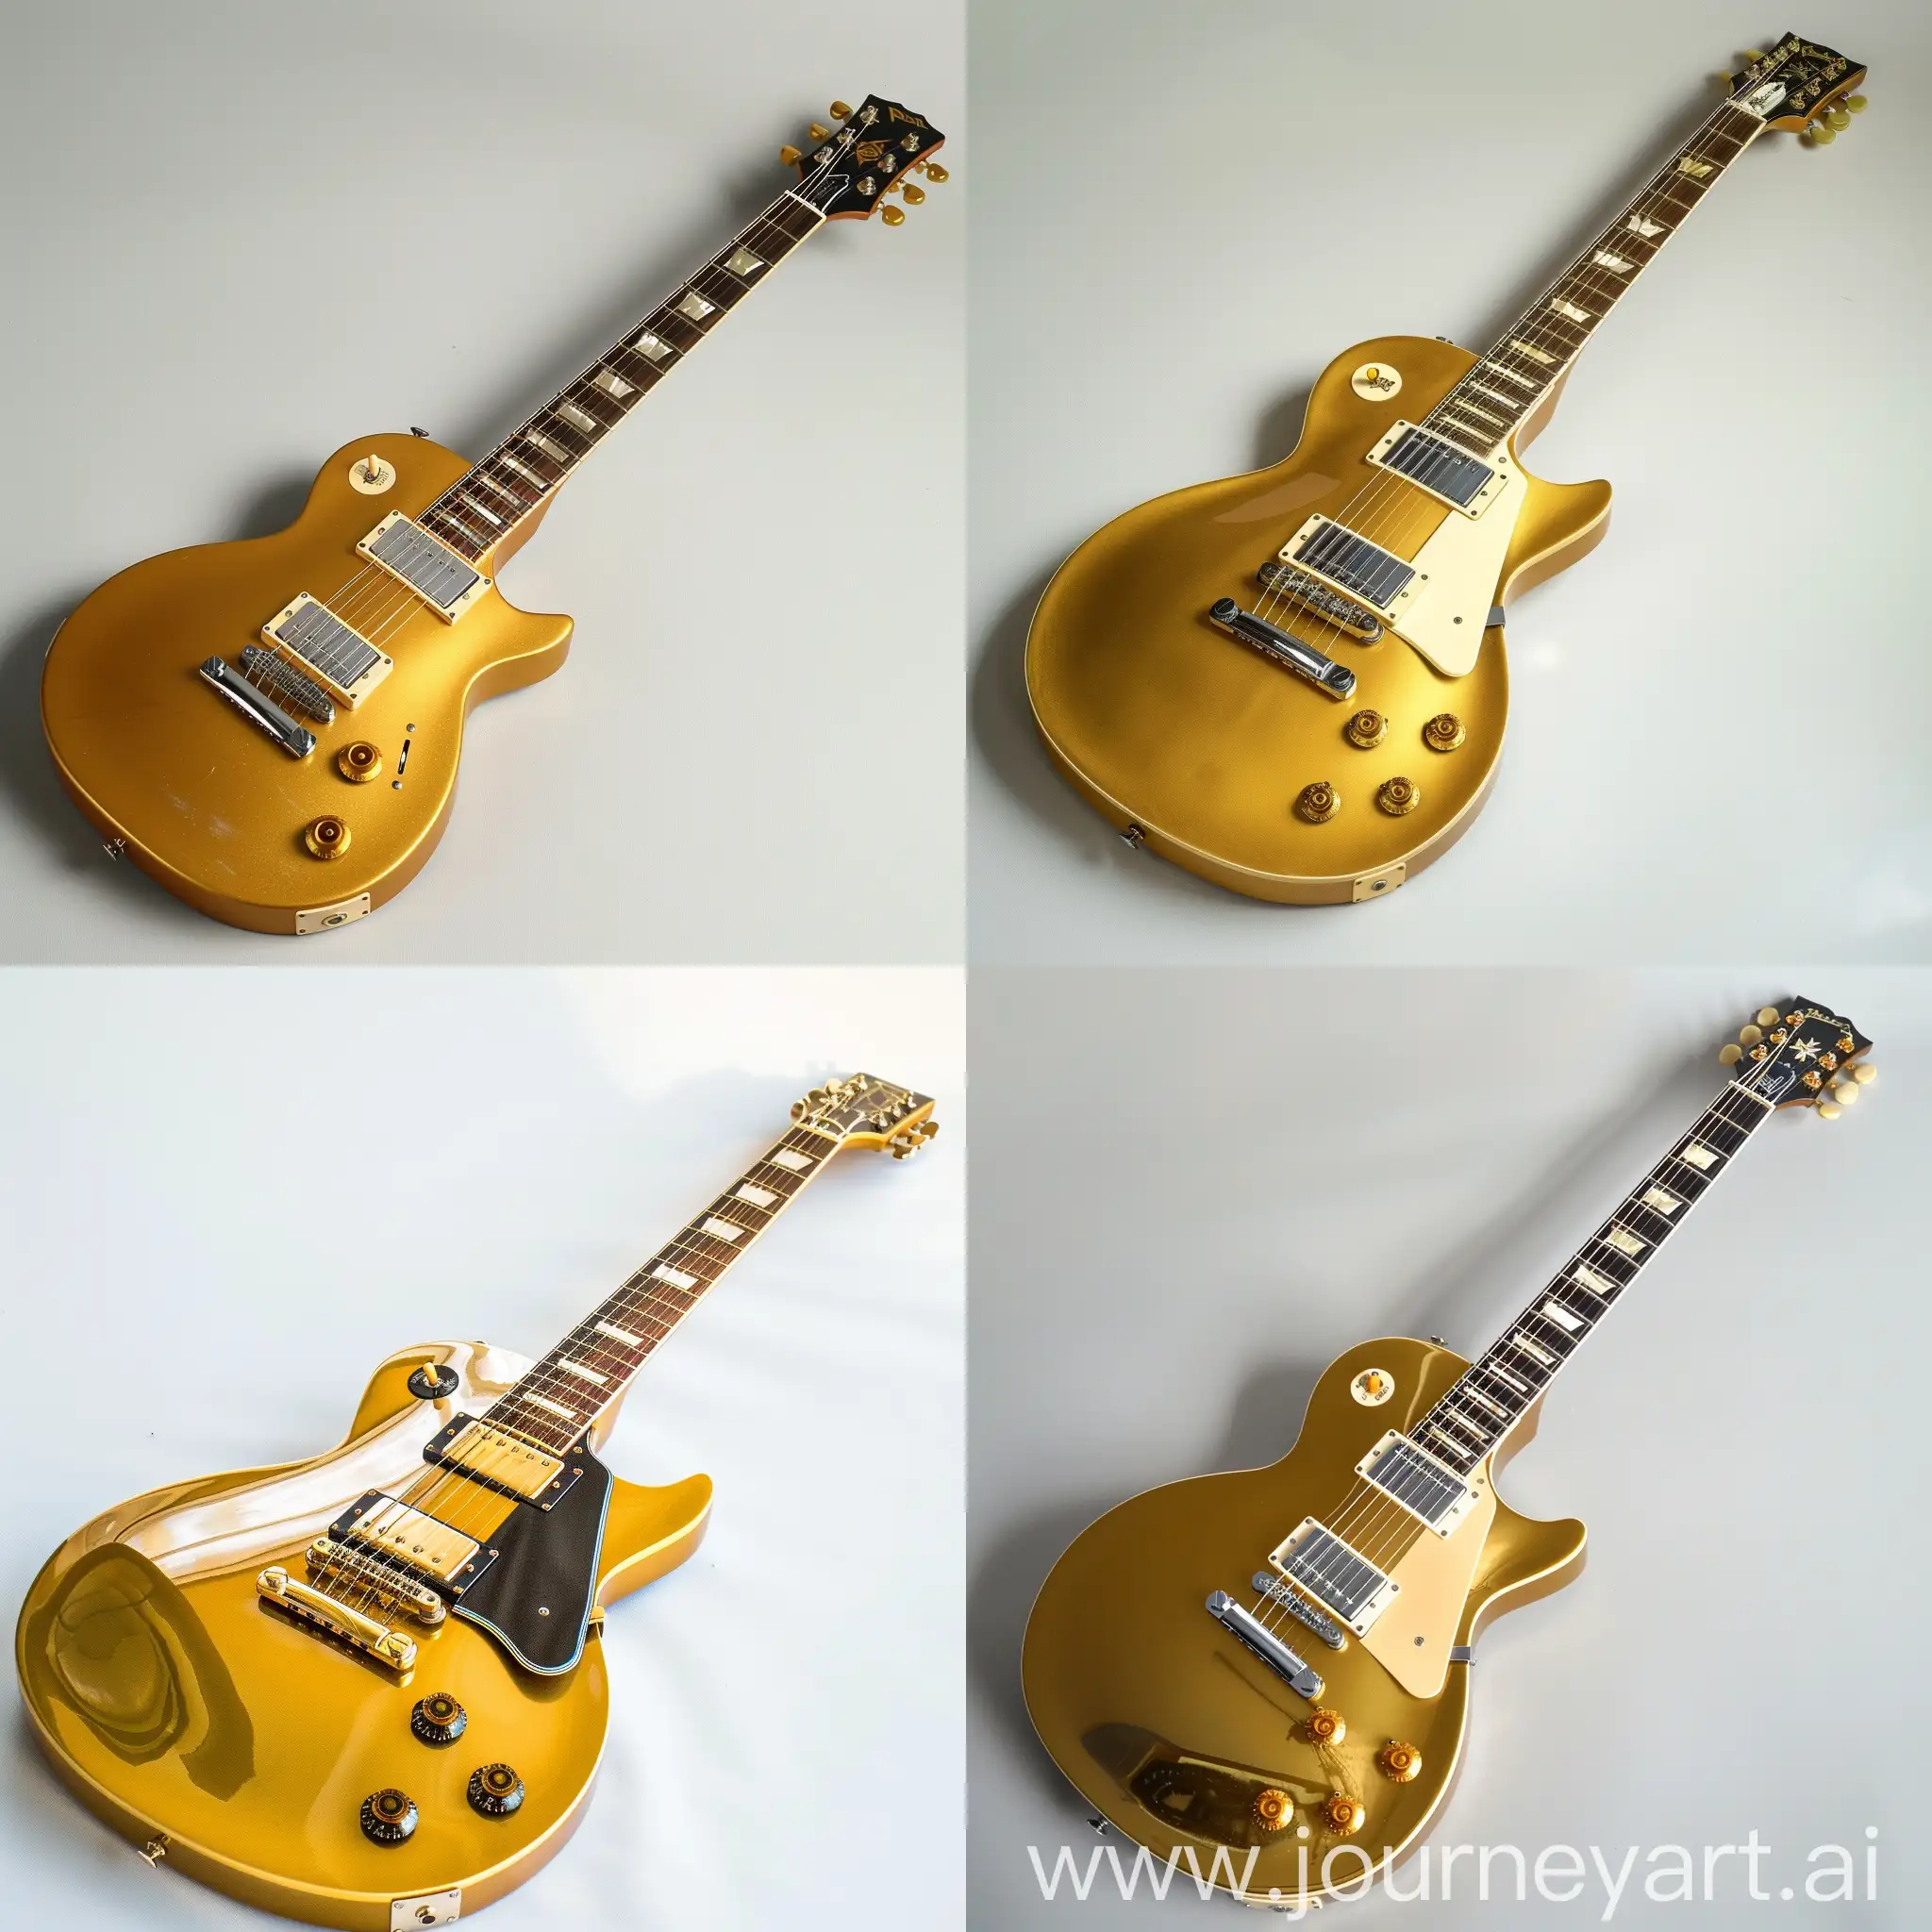 Shiny-Golden-Electric-Guitar-on-Clean-White-Background